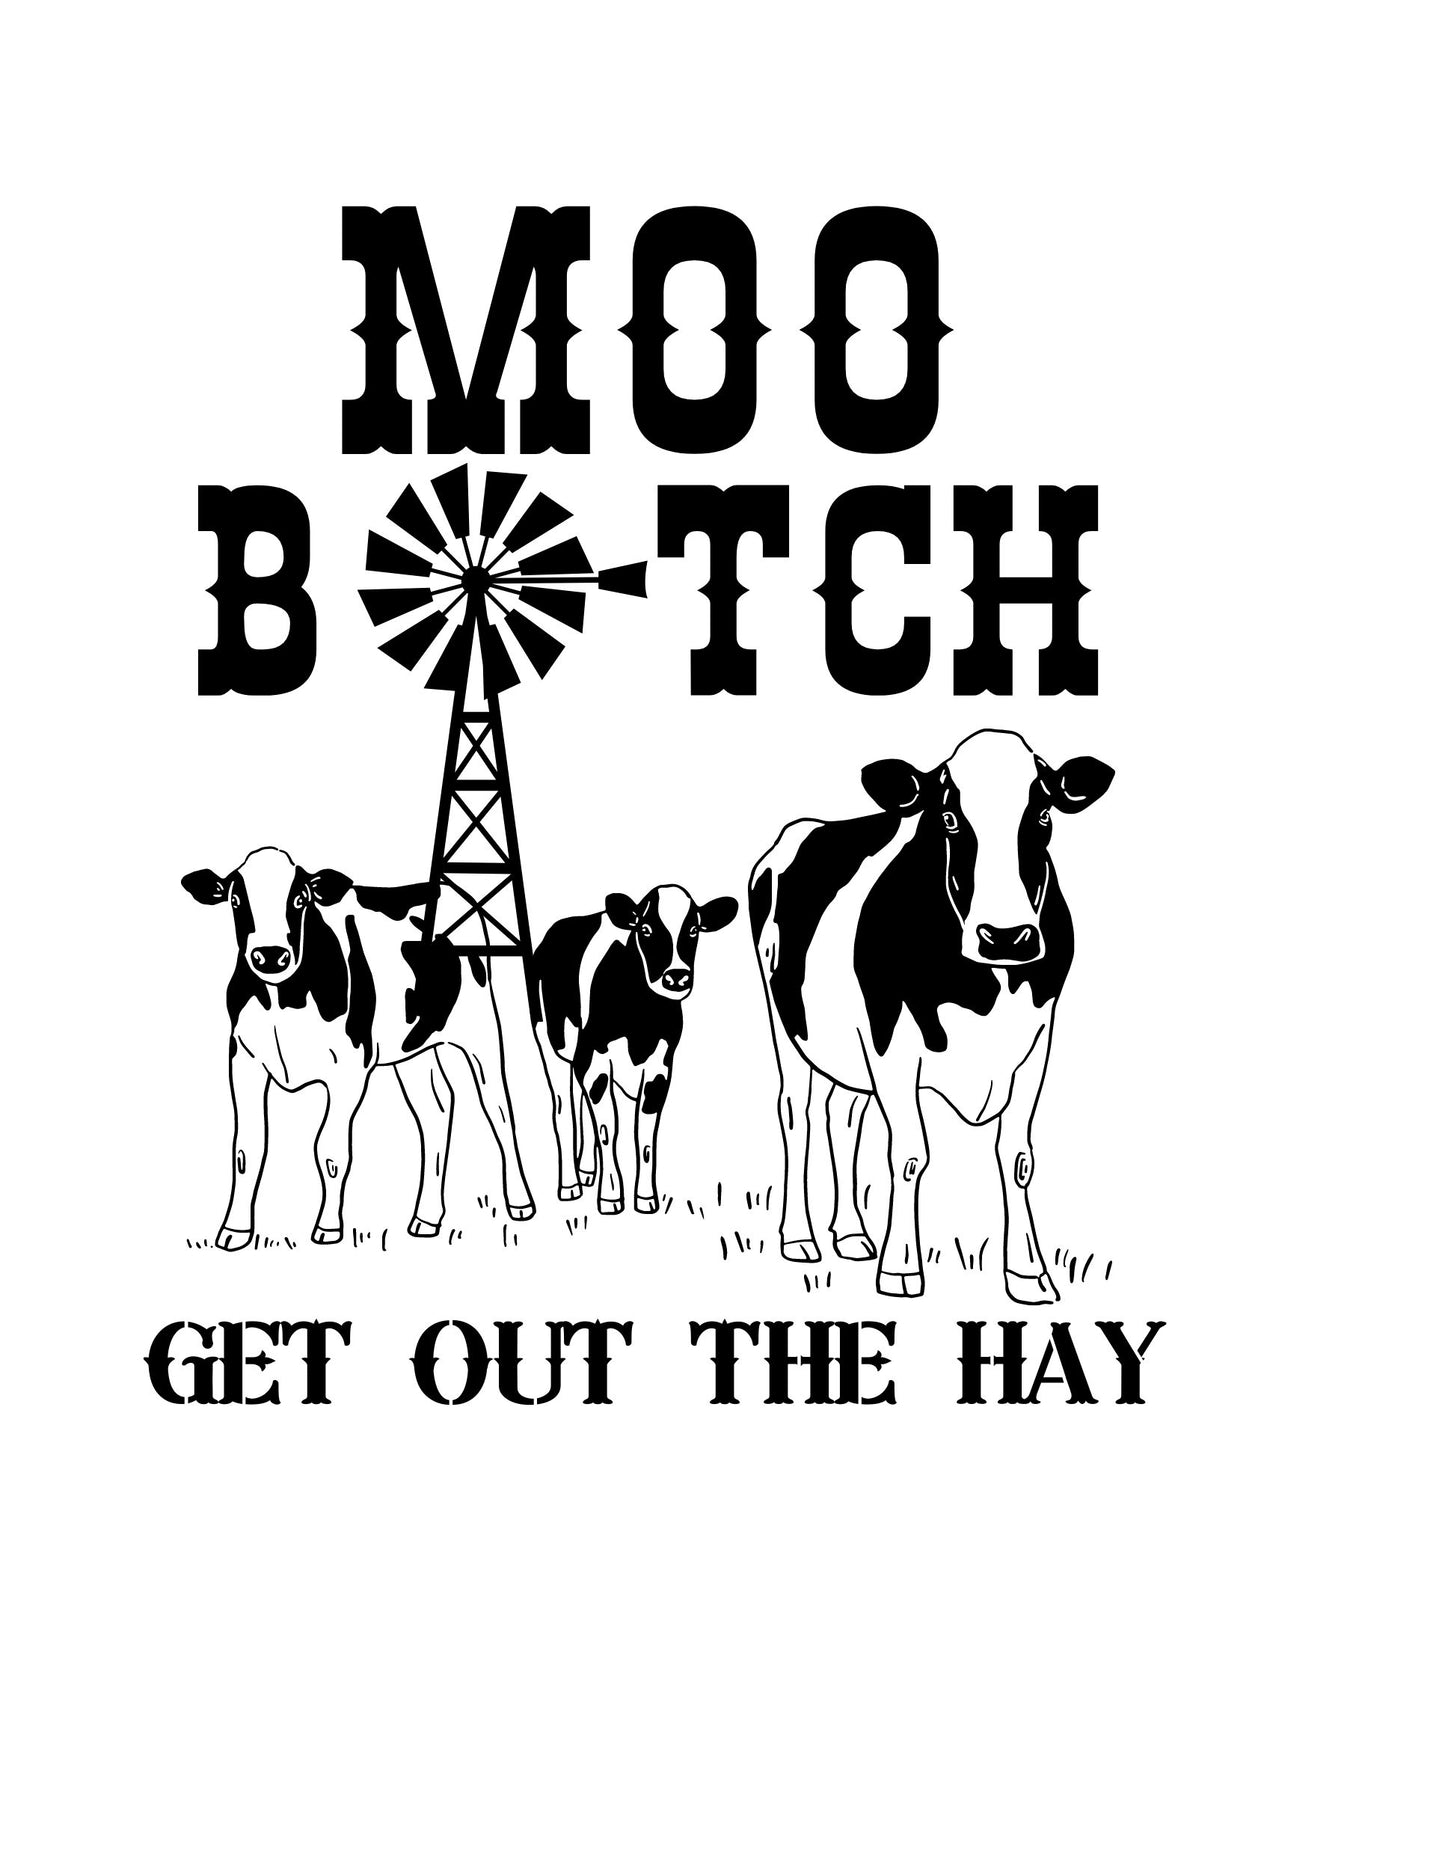 Moo B*tch! Get Out The Hay!